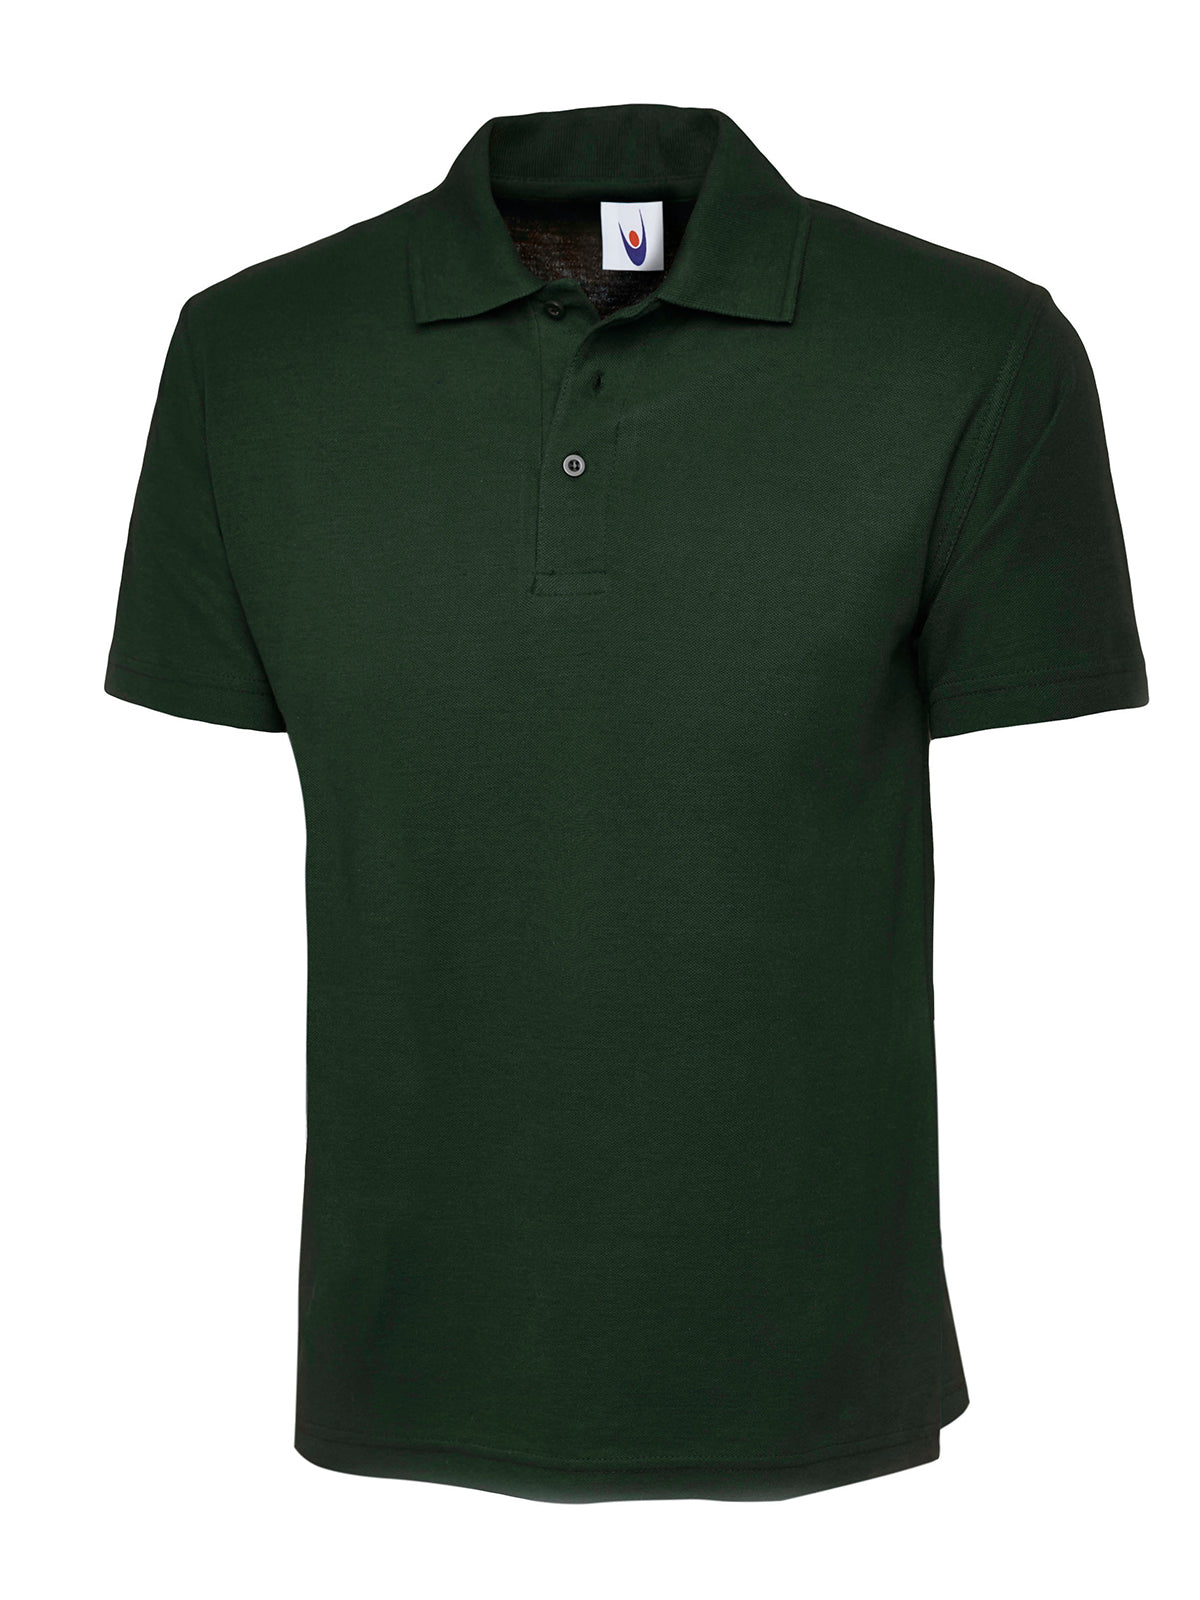 Uneek Classic Bottle Polo shirt with Easton embroidery (Floristry)